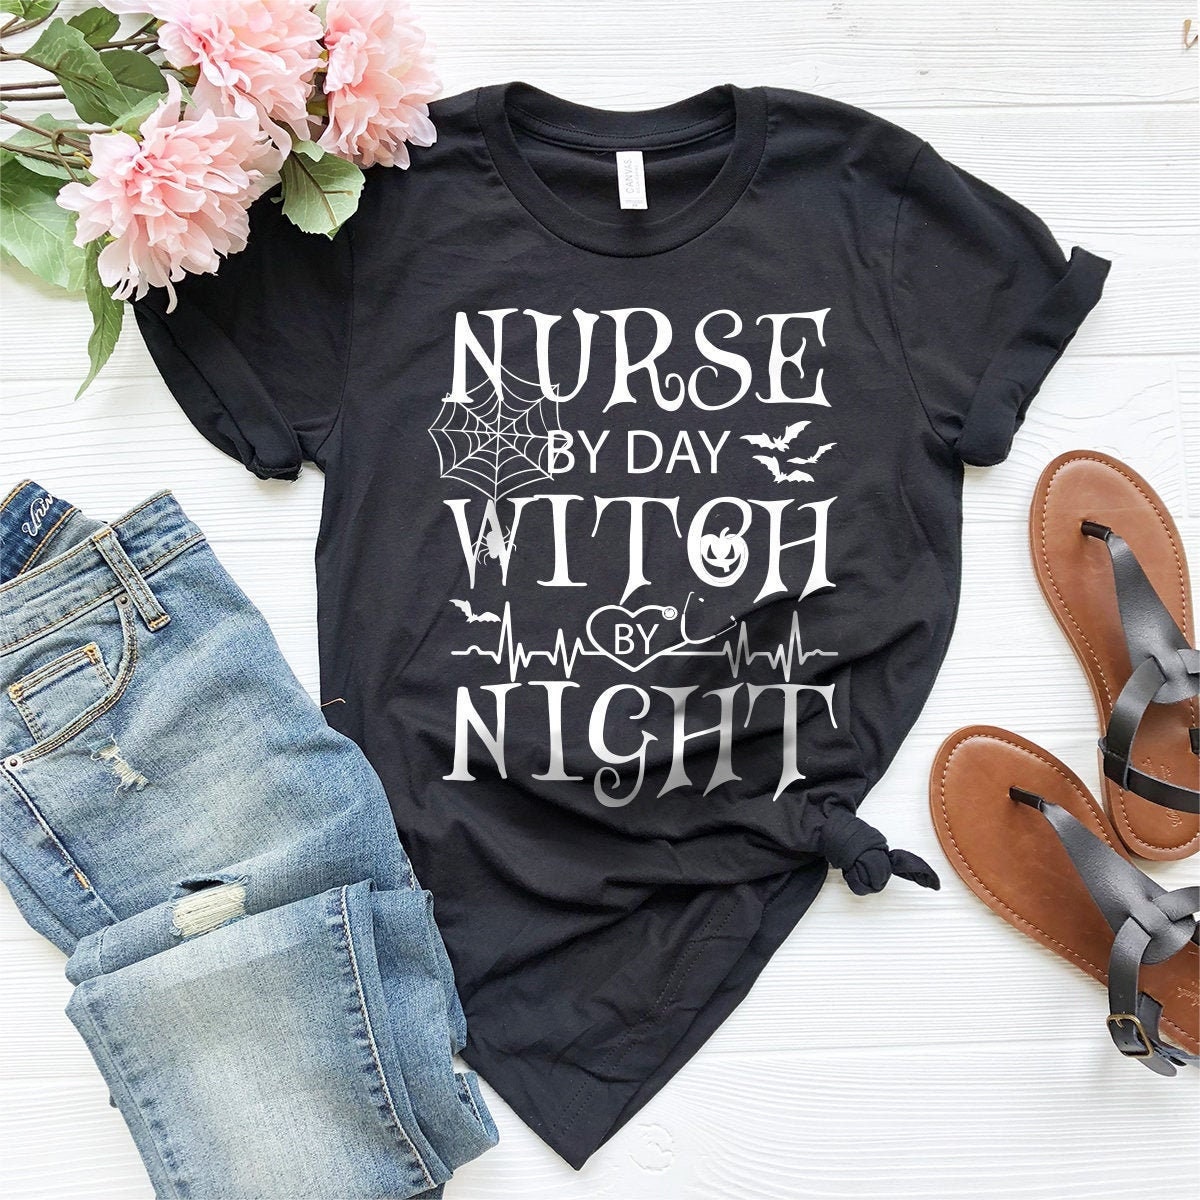 Nurse By Day Witch By Night shirt, Nurse Halloween Tshirt, Nurse Witch Shirt, Witch Sisters Tee, Halloween Graphic Tee, Fall Tshirt - Fastdeliverytees.com